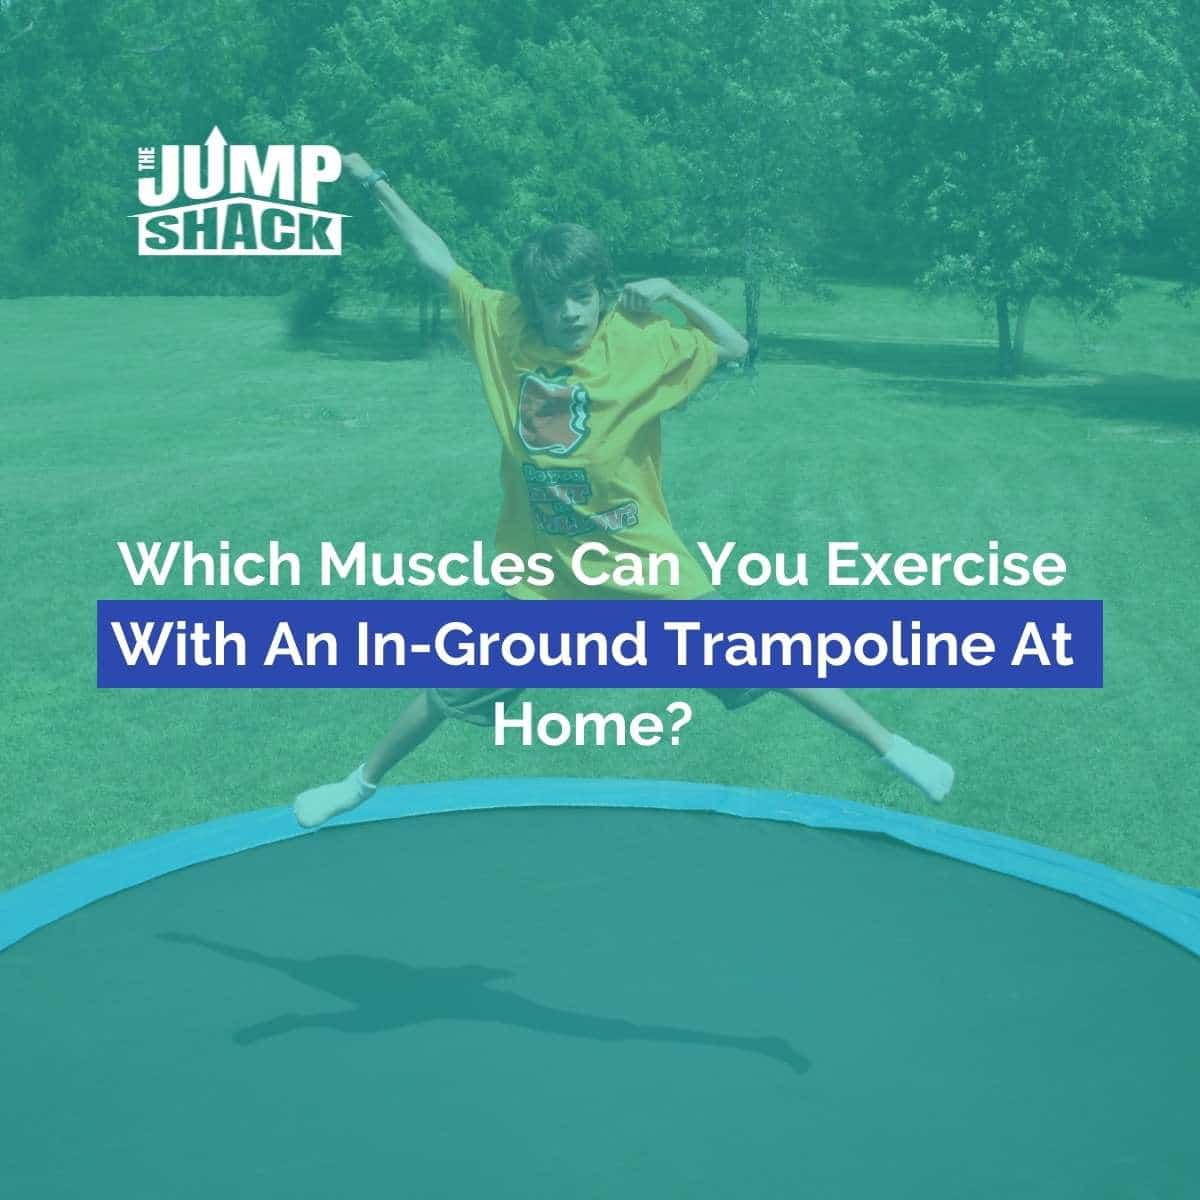 Which Muscles Can You Exercise With An In-Ground Trampoline At Home